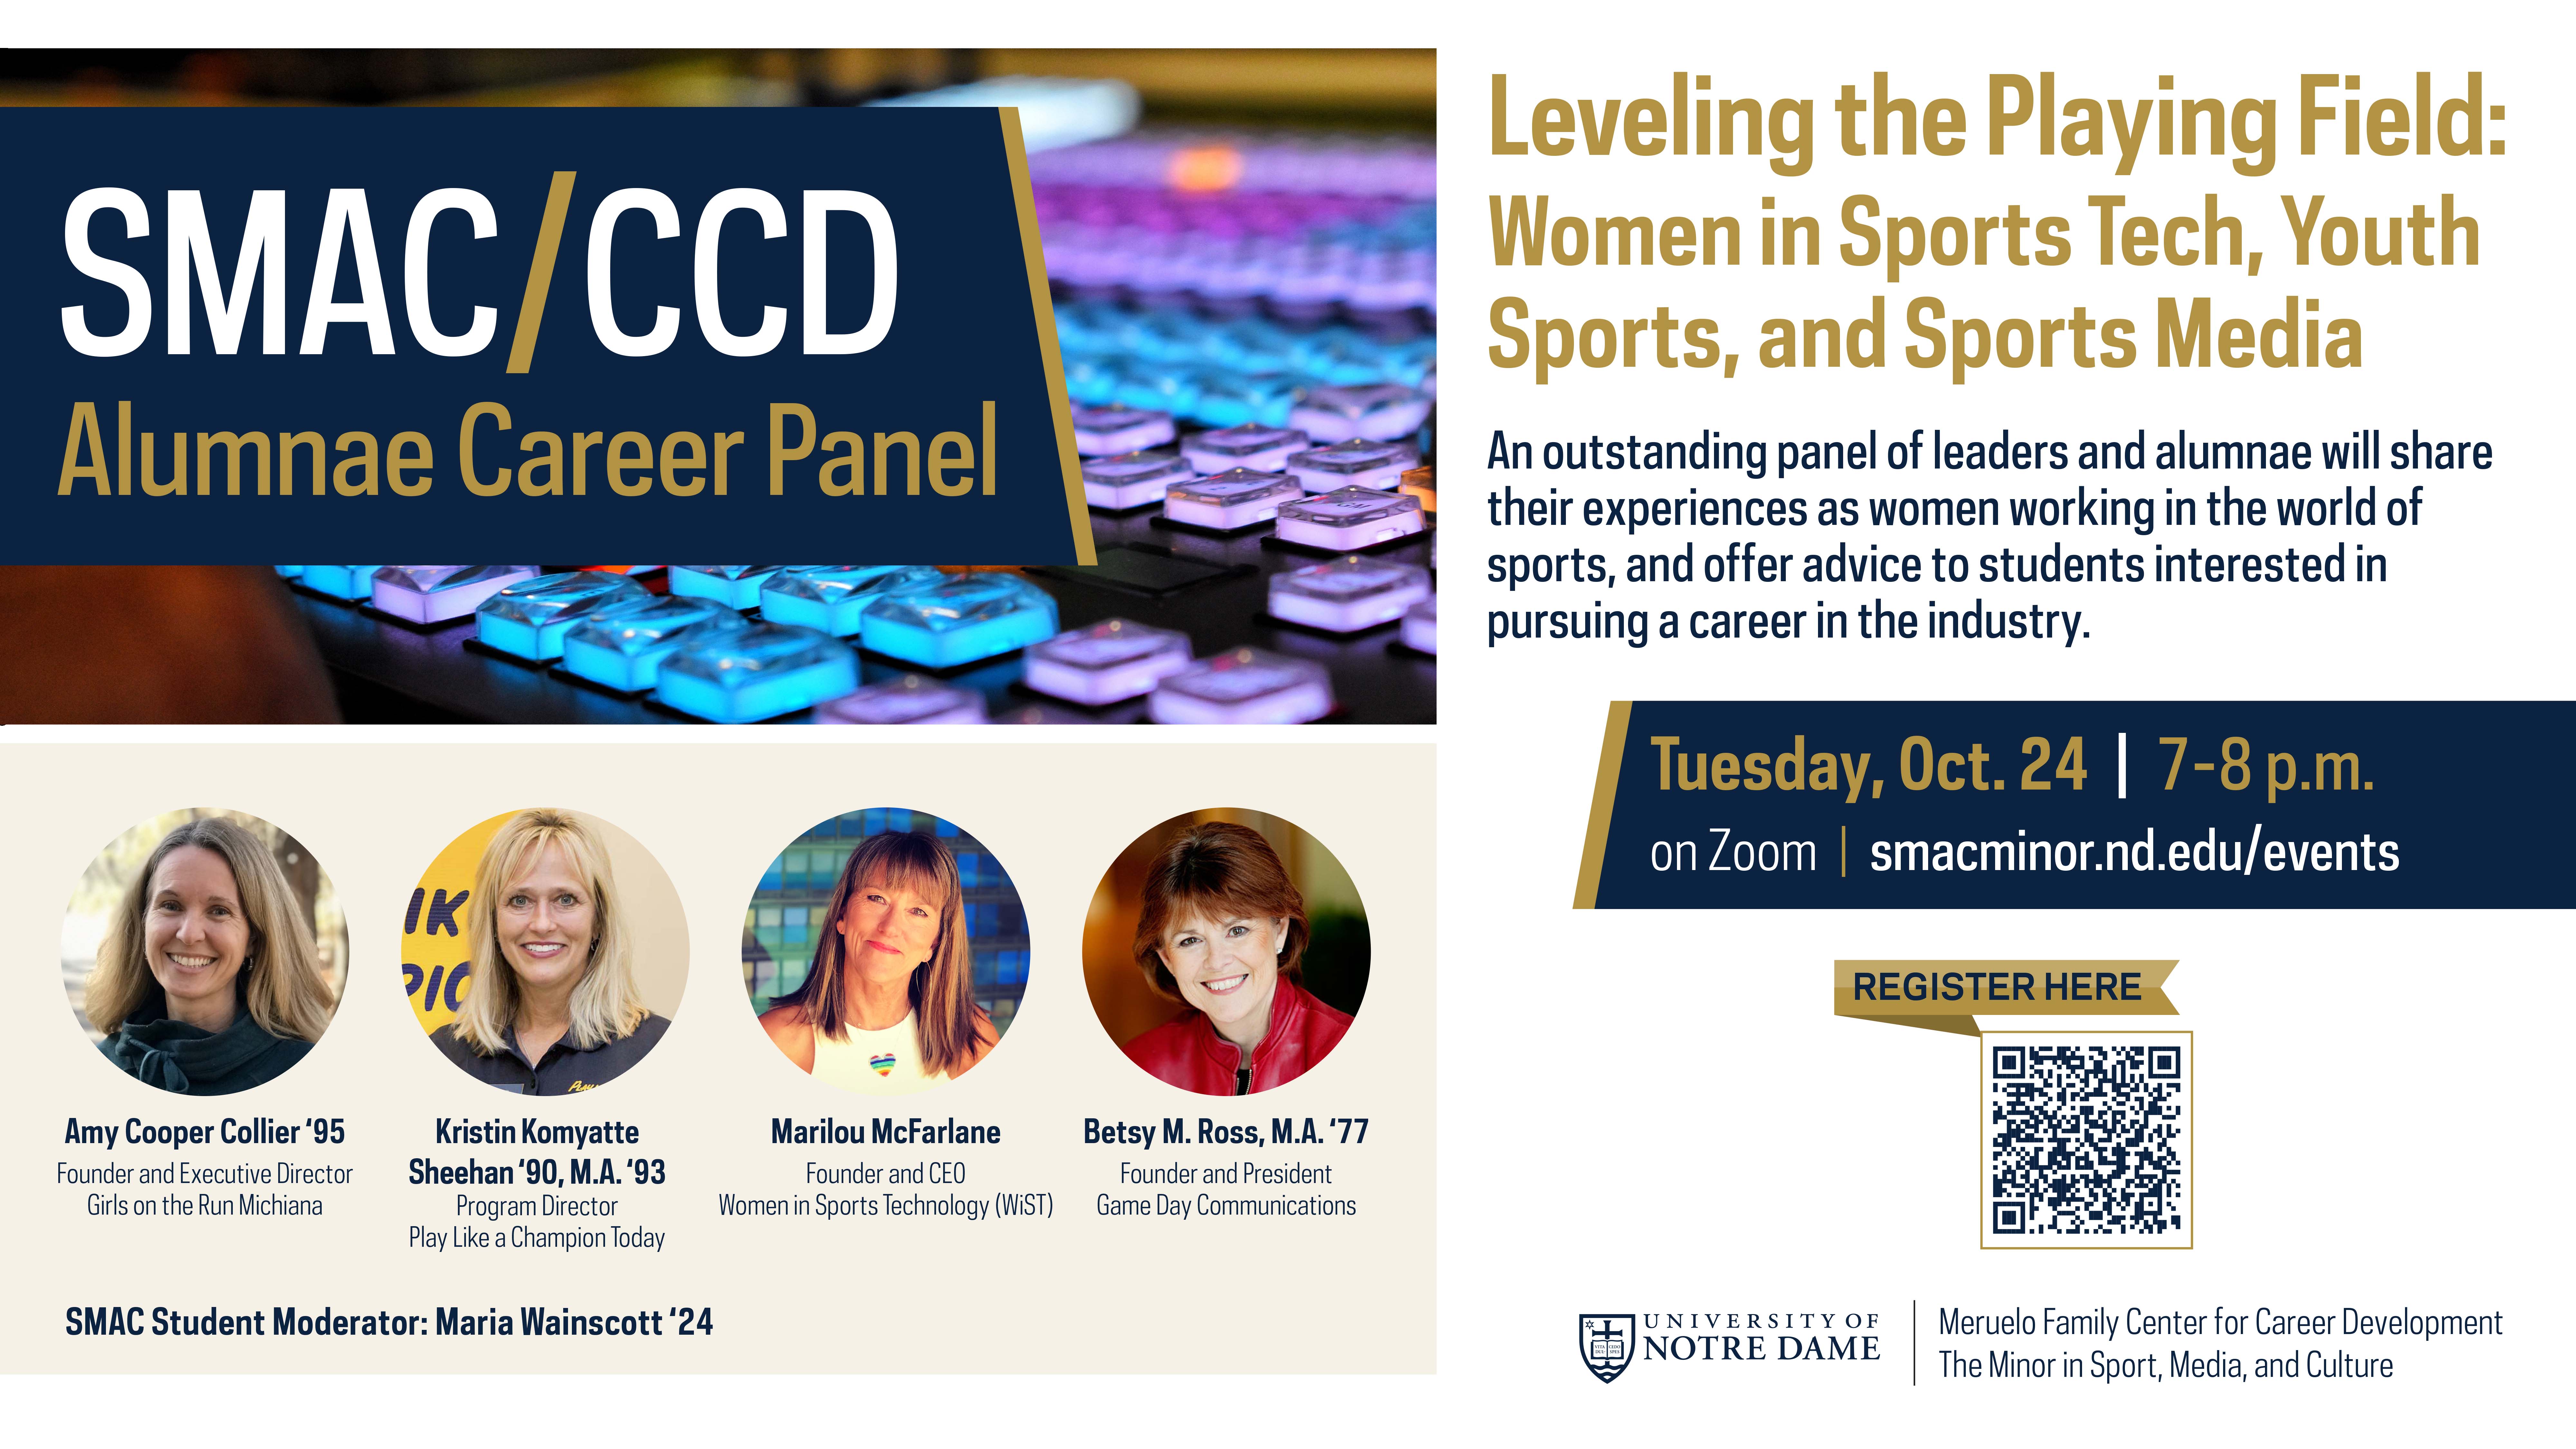 Alumni Career Panel: Women in Sports Tech, Youth Sports, and Sports Media